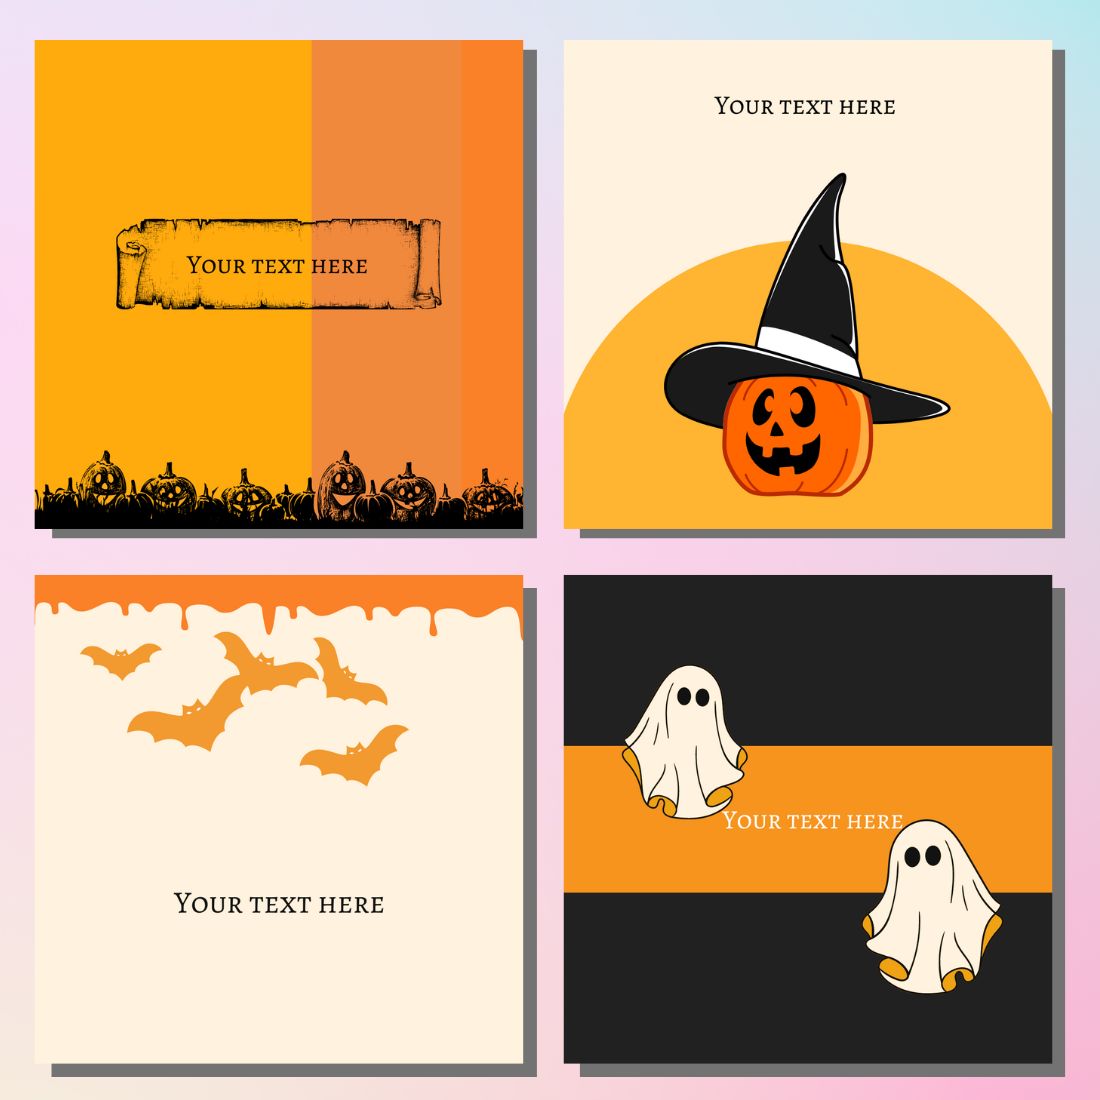 Four interesting images on the theme of Halloween.